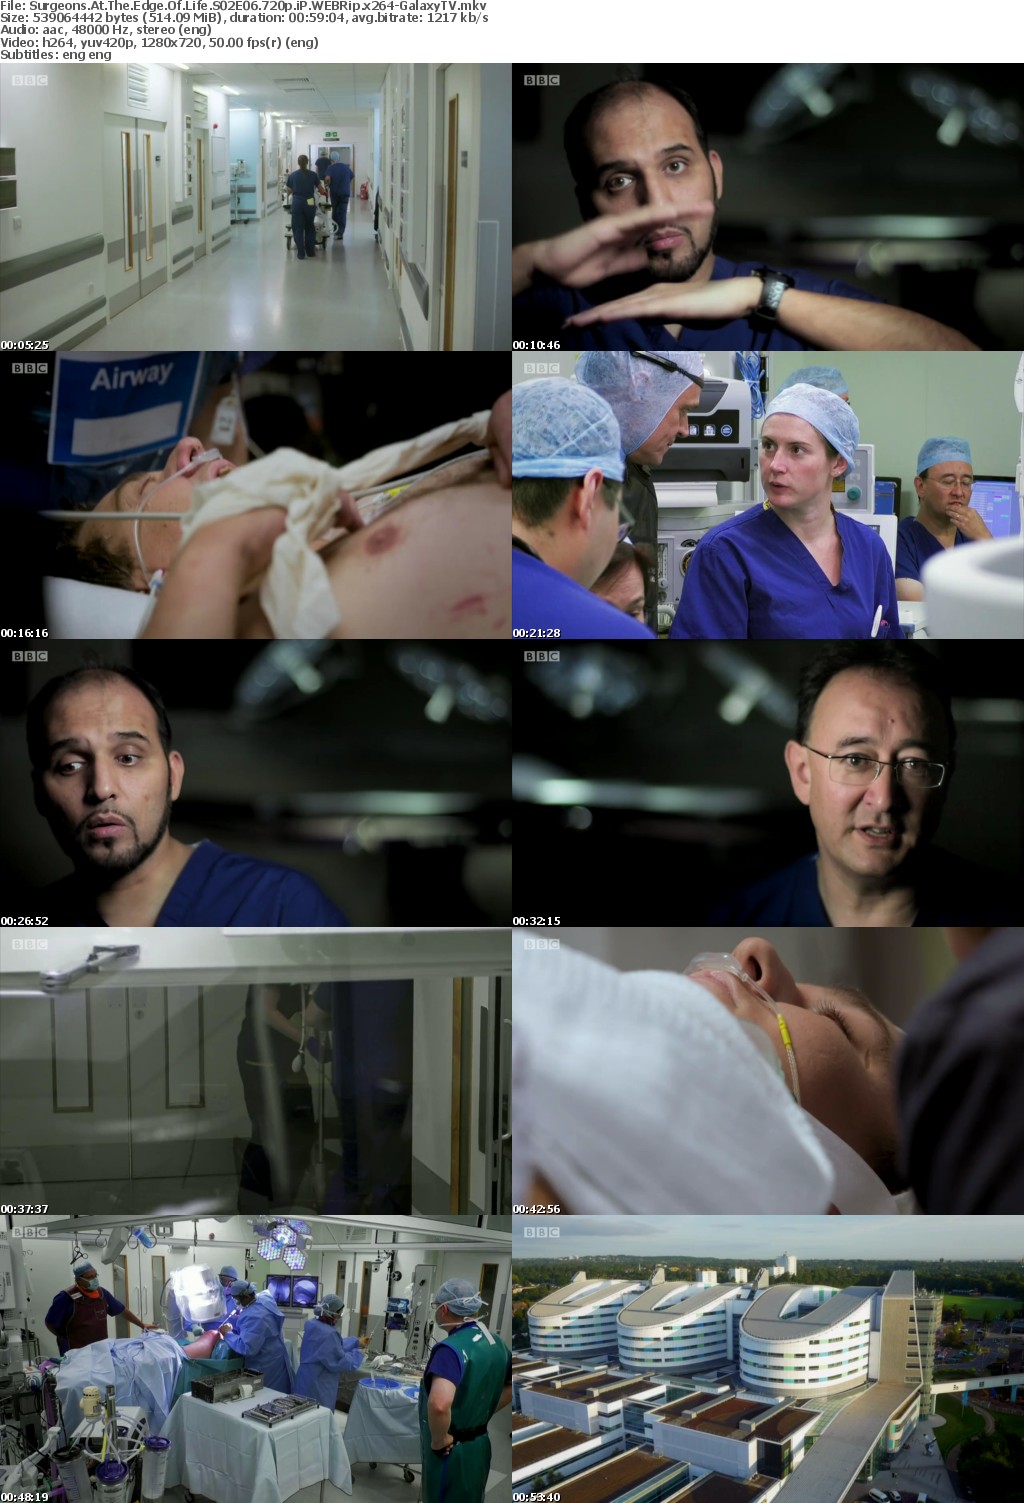 Surgeons At The Edge Of Life S02 COMPLETE 720p iP WEBRip x264-GalaxyTV